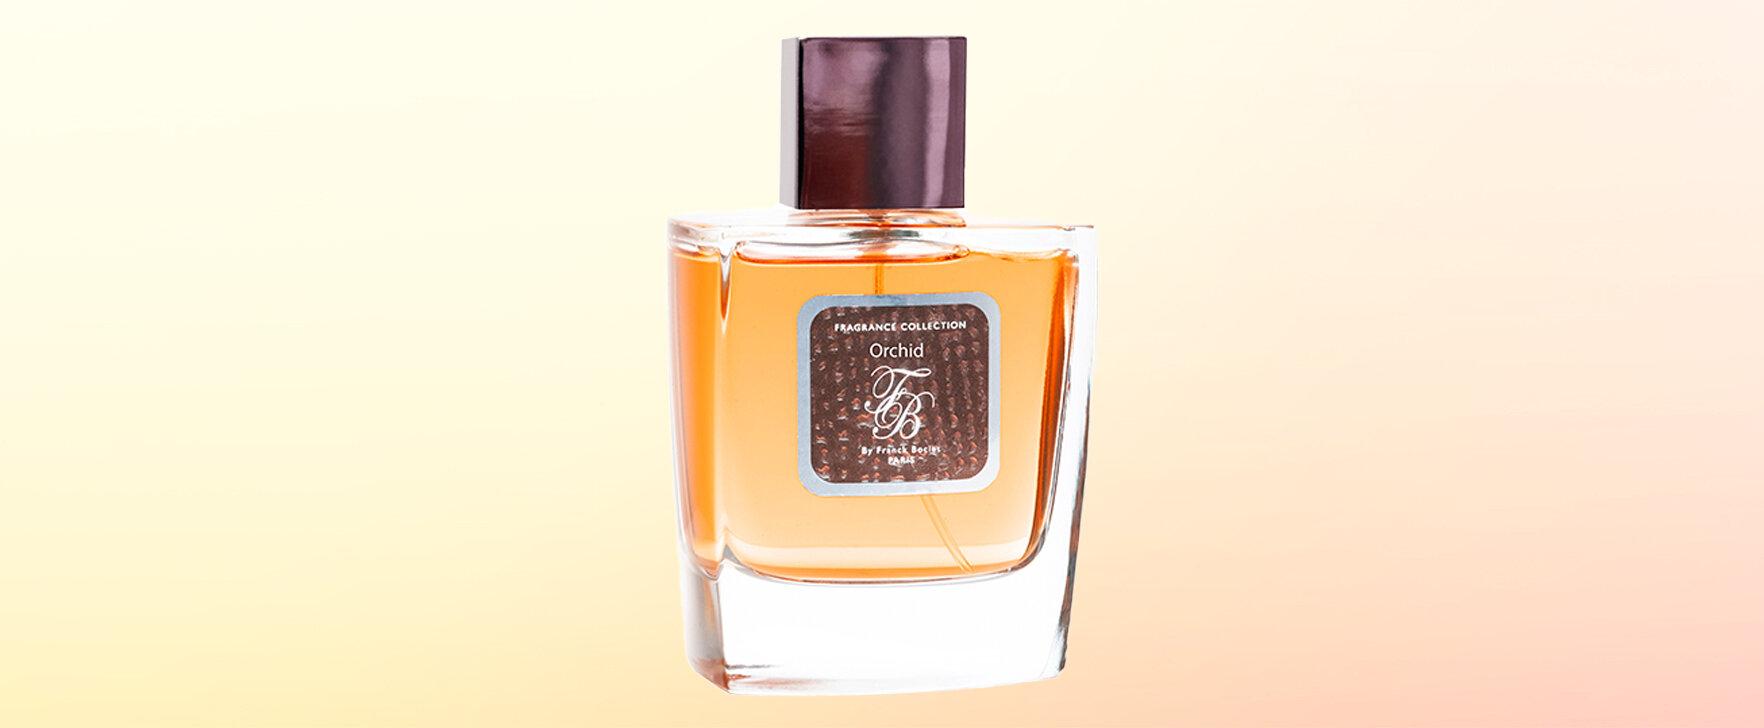 Orchid by Franck Boclet: The Essence of Orchid and Sweet Vanilla